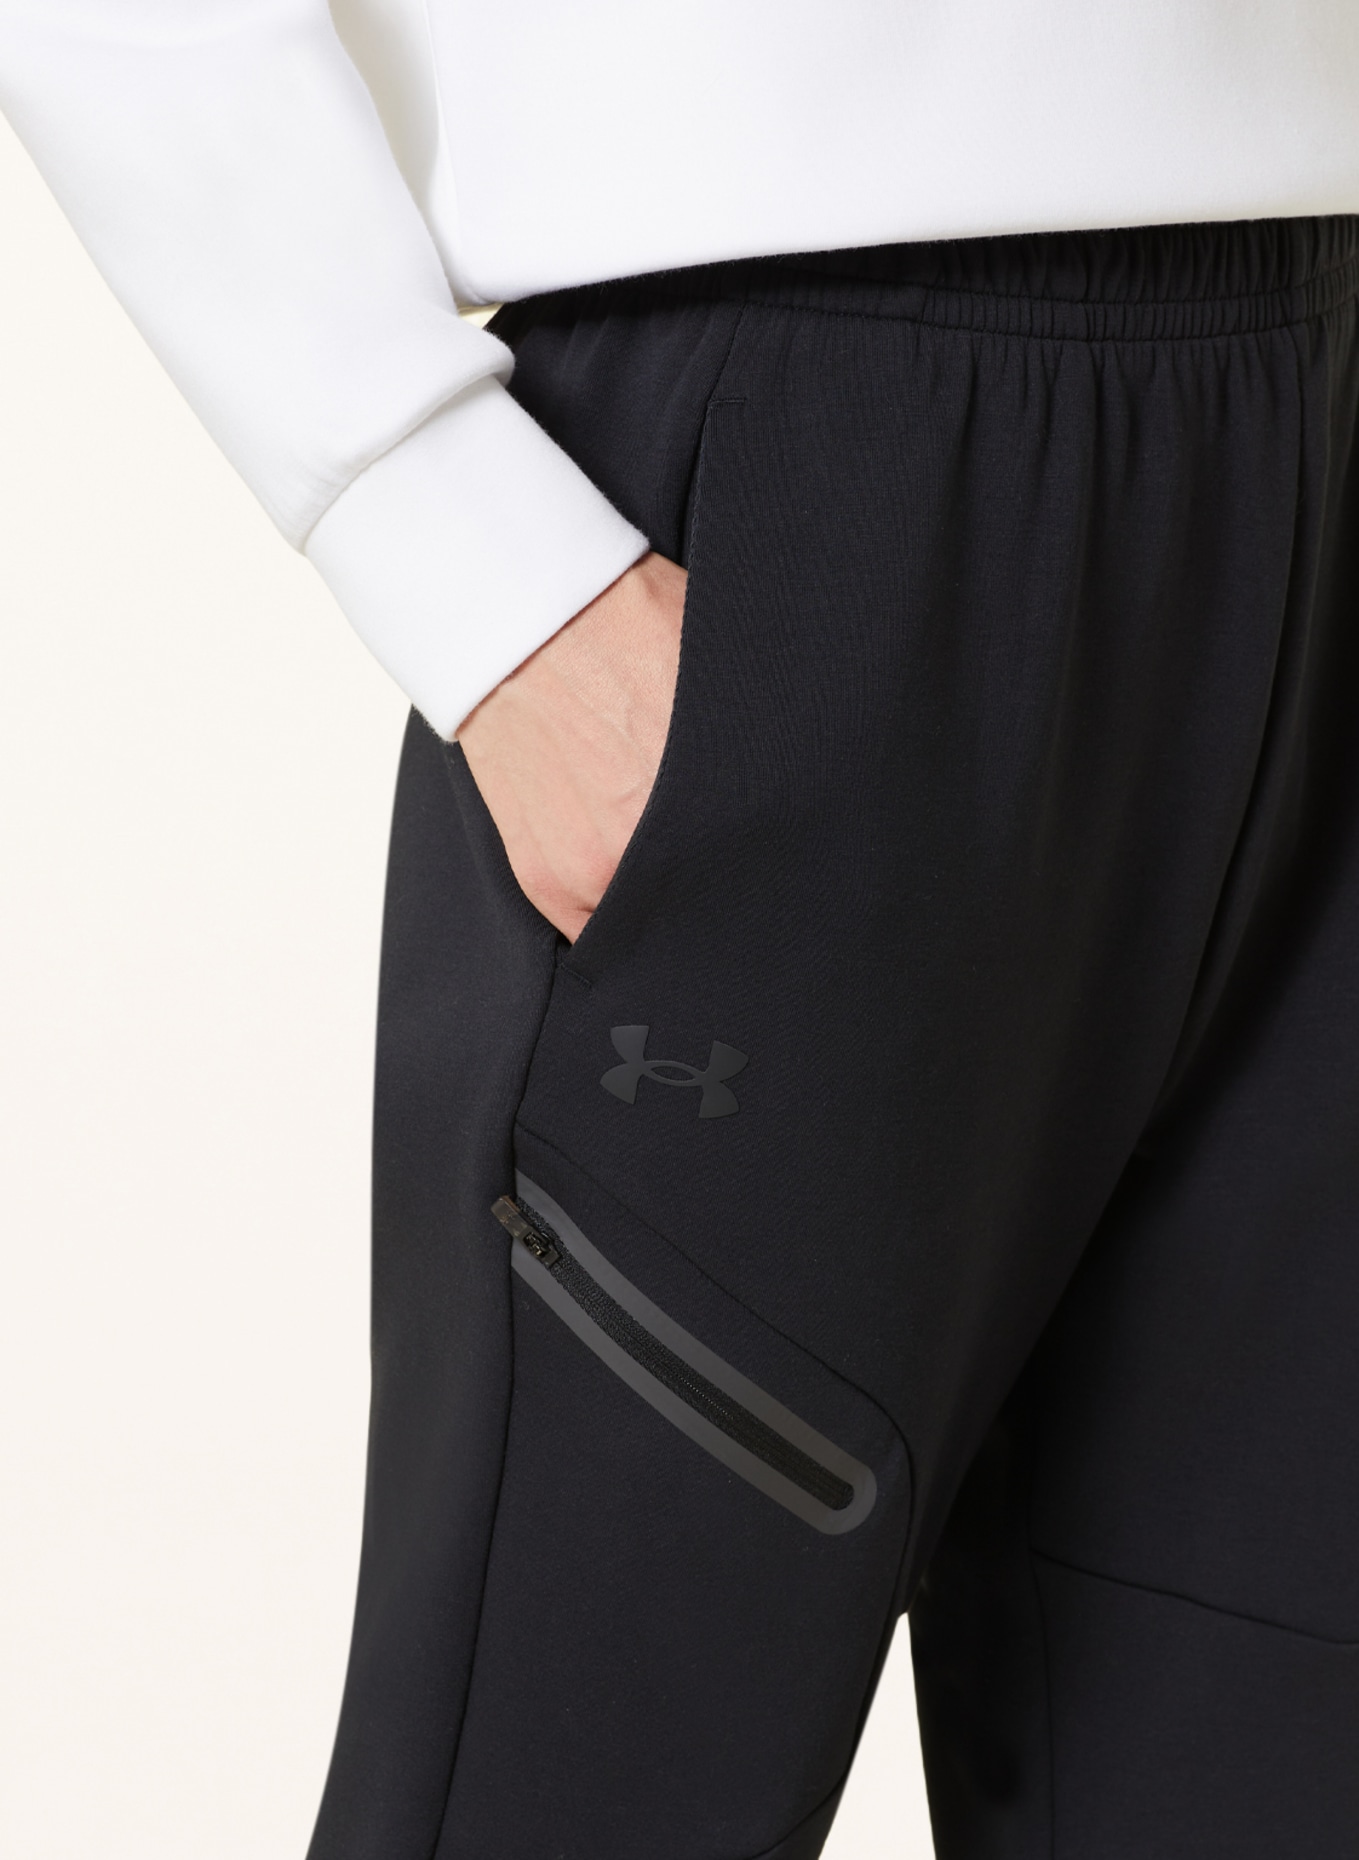 UNDER ARMOUR Trainingshose UNSTOPPABLE in schwarz